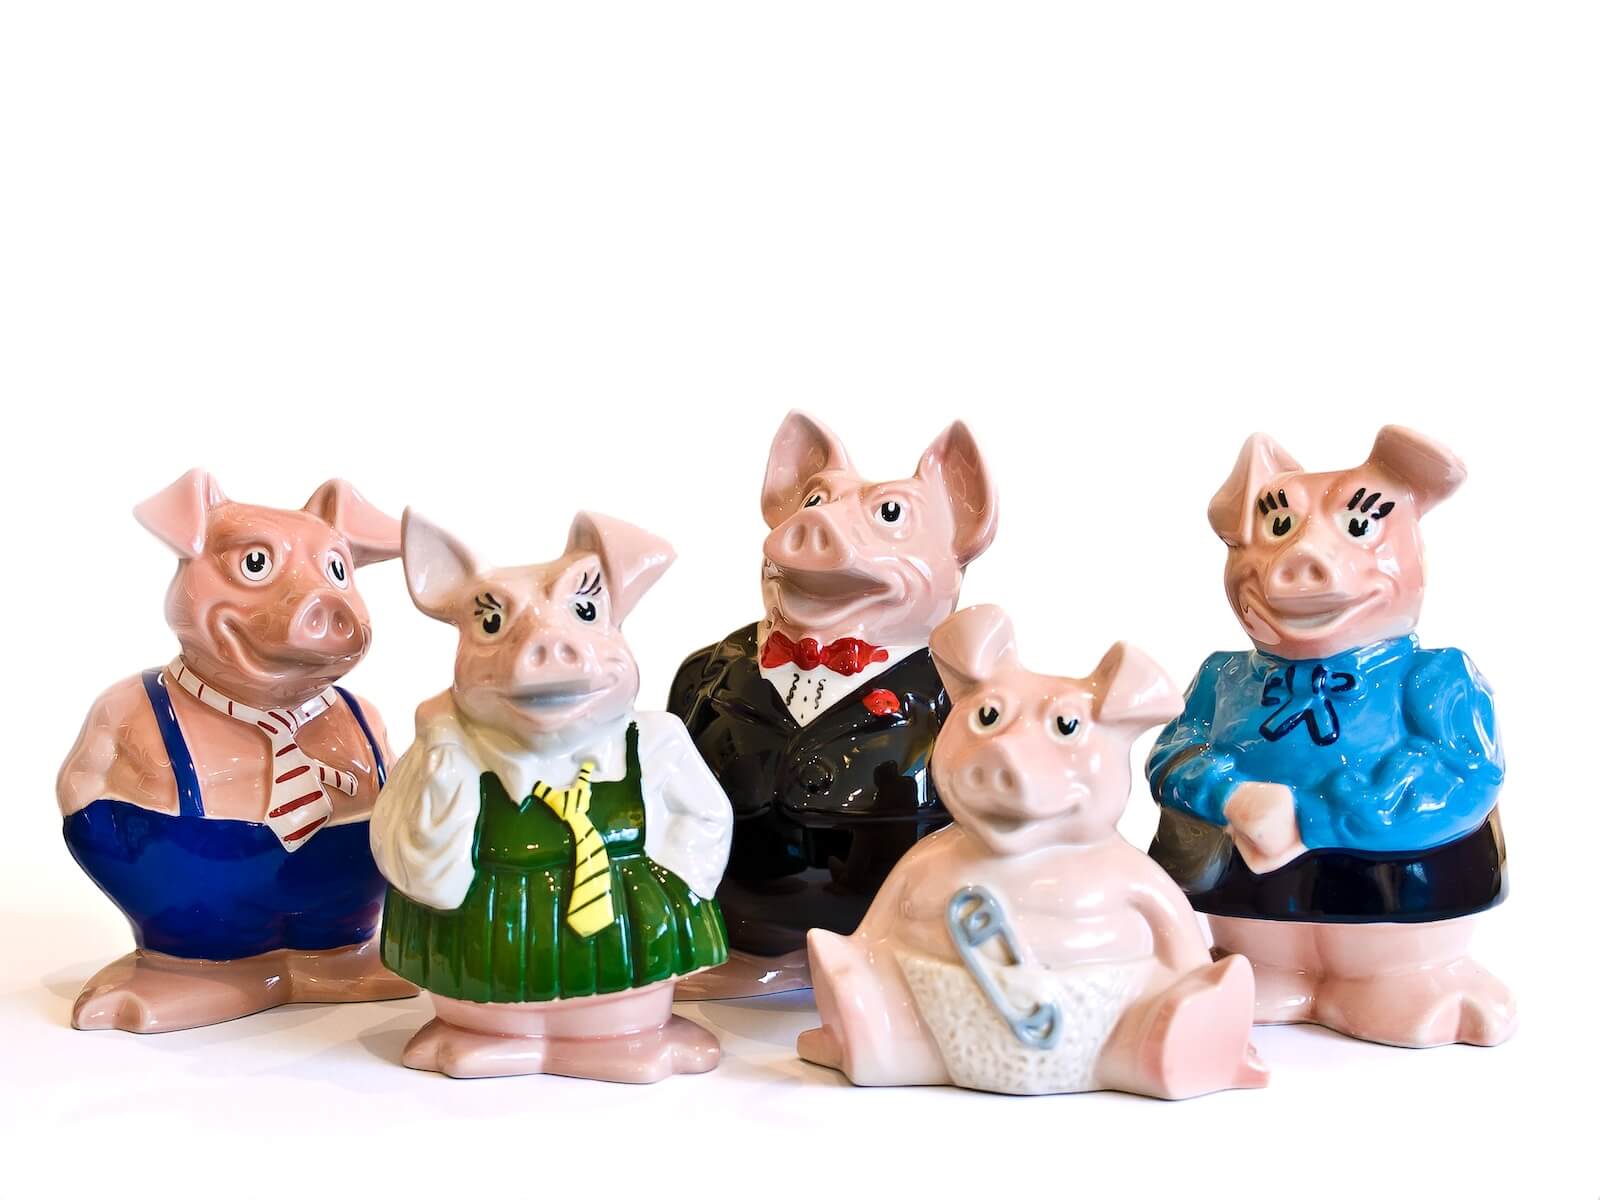 a group of pig figurines sitting next to each other